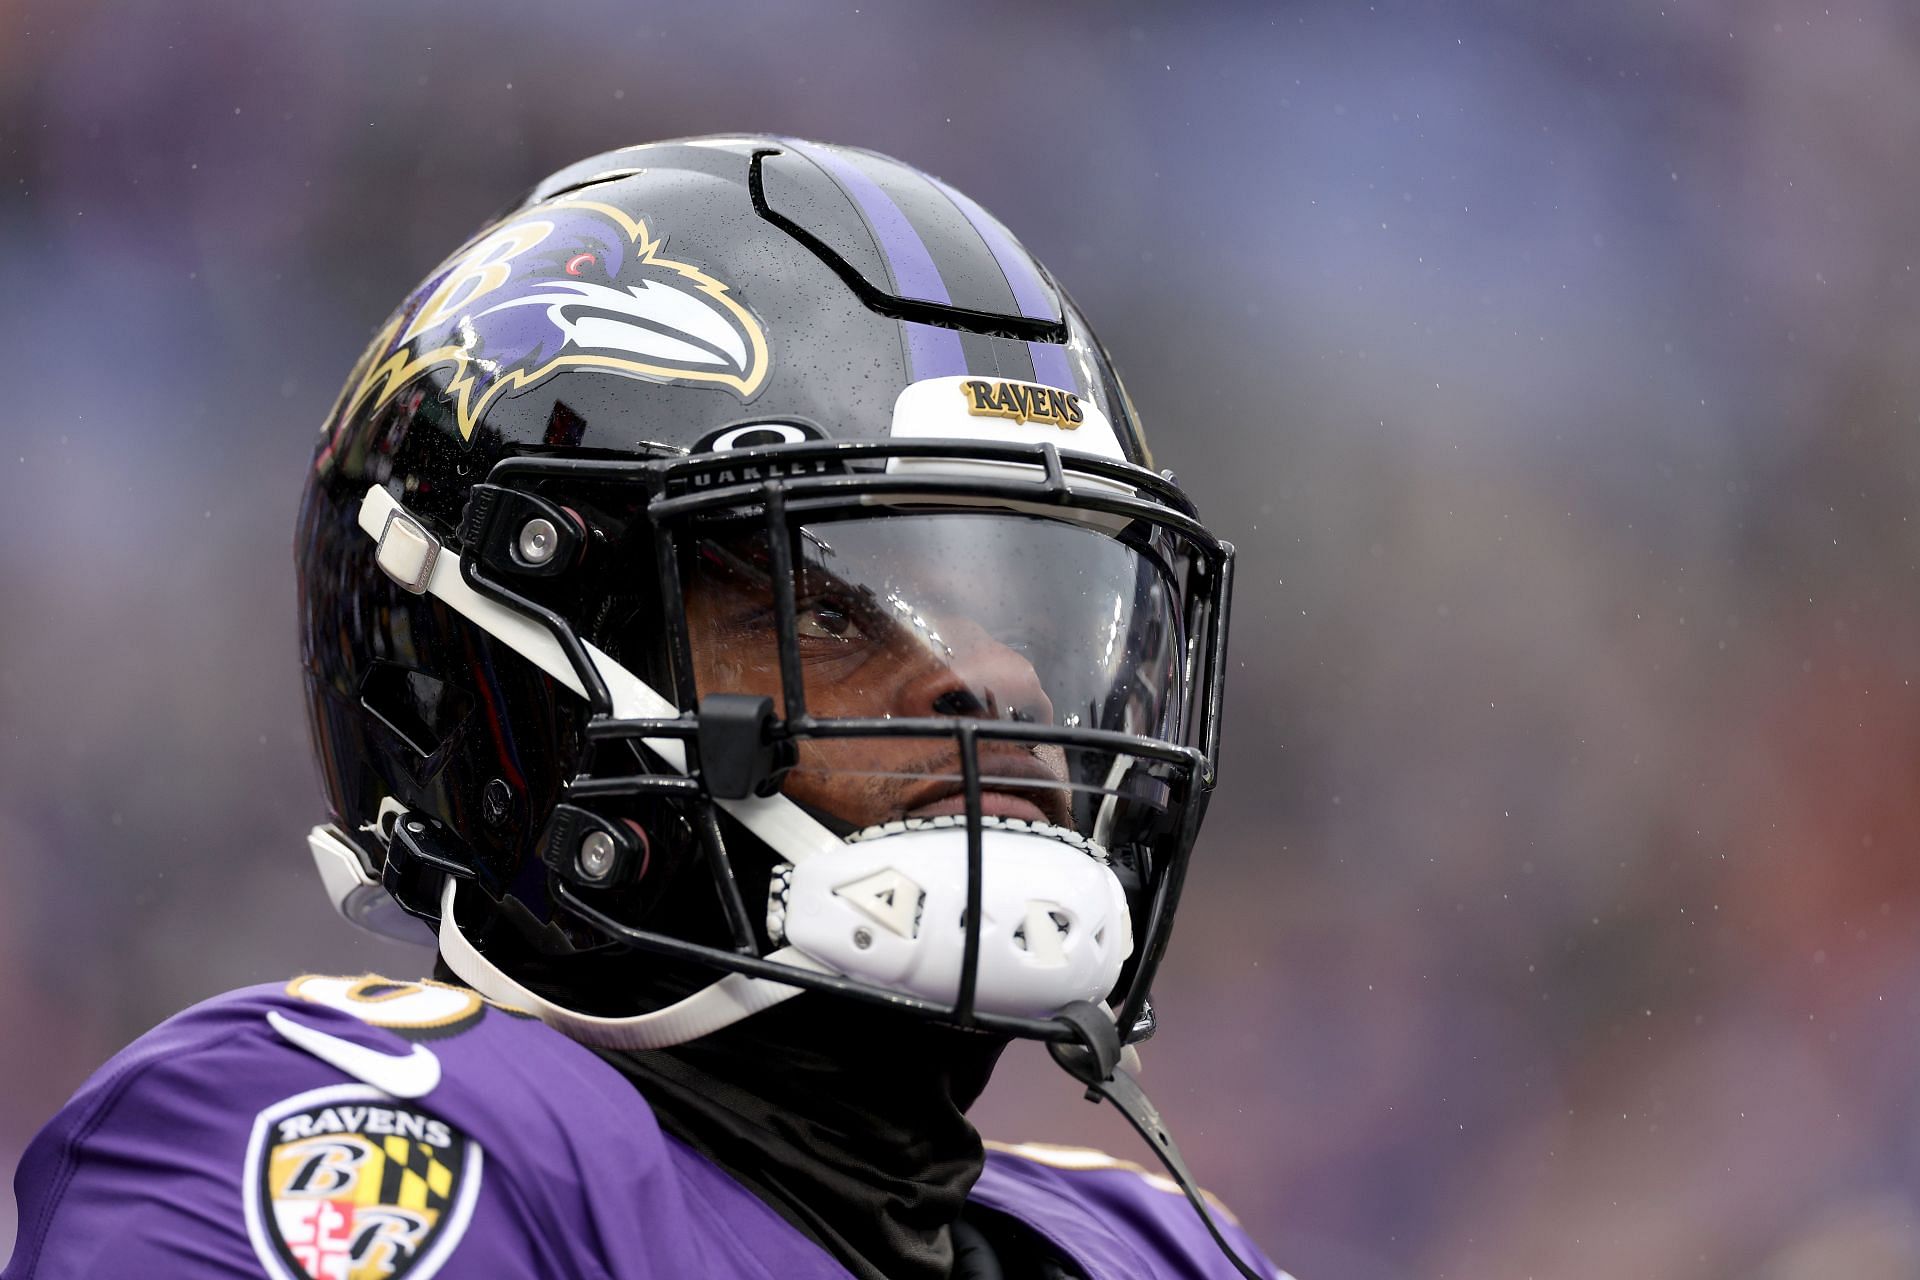 Can the Ravens make it to the Super Bowl?